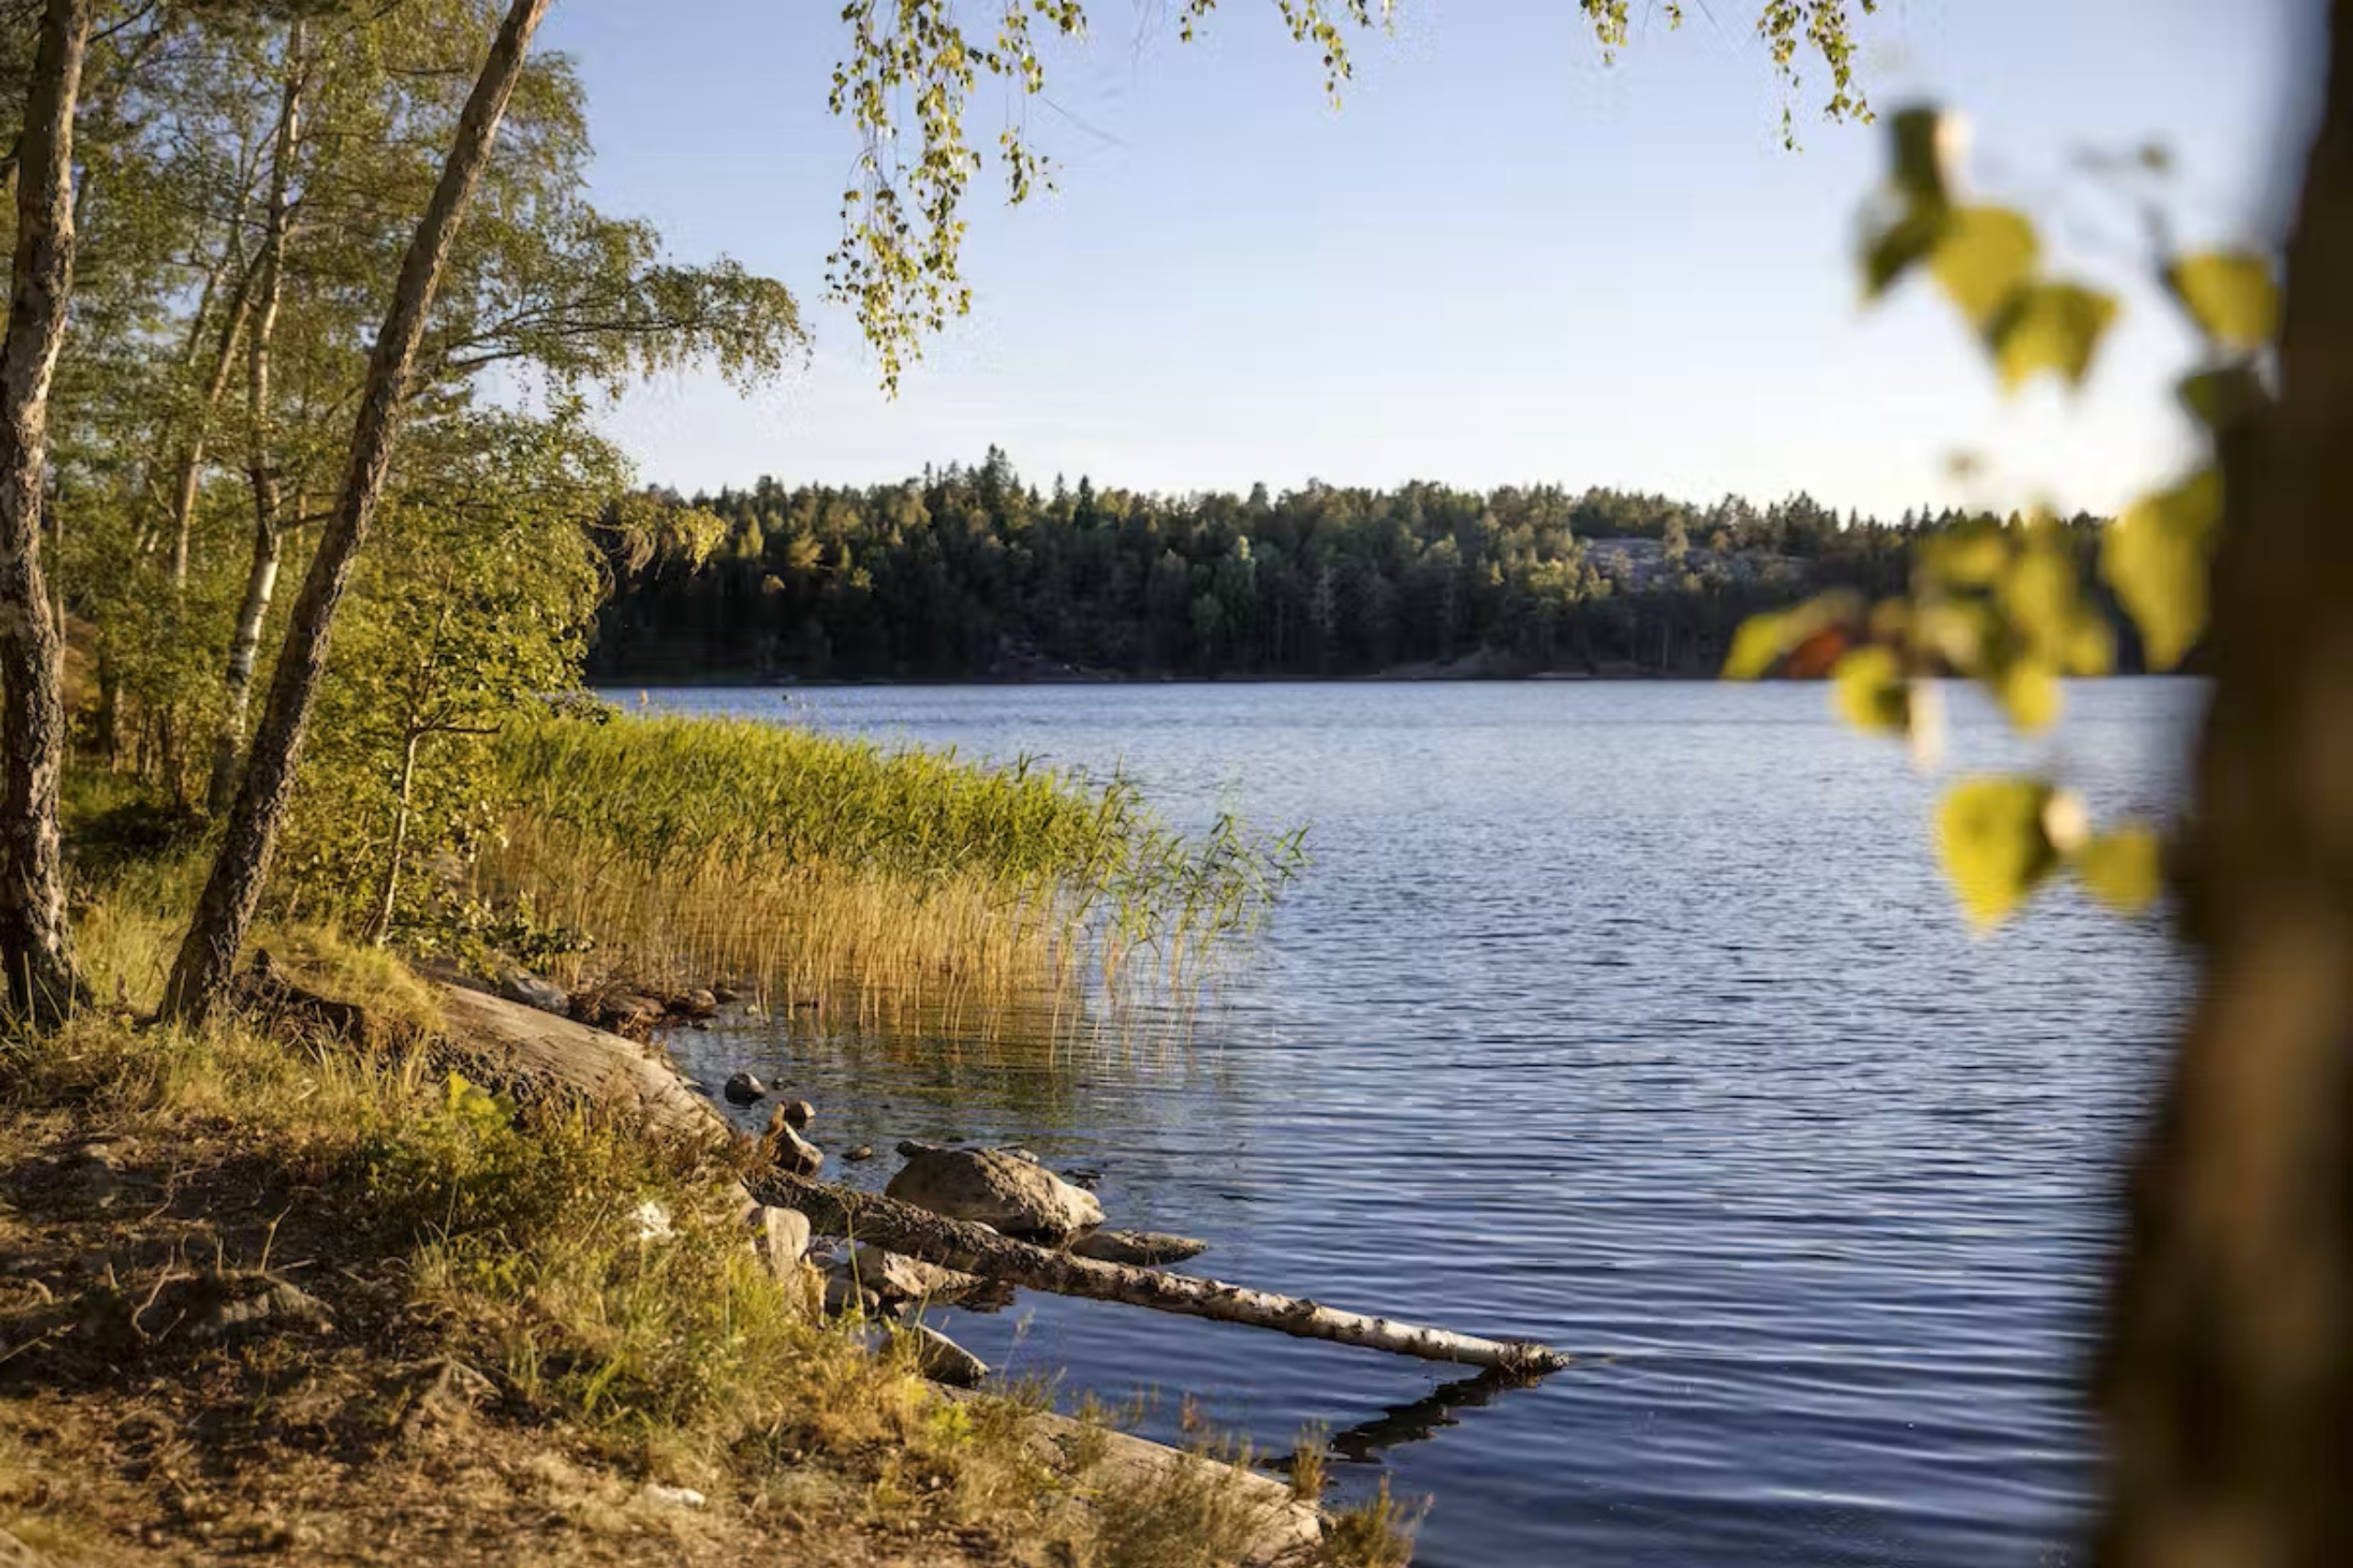 From Ställplats Stockholm, it is close to both the city and nature. 